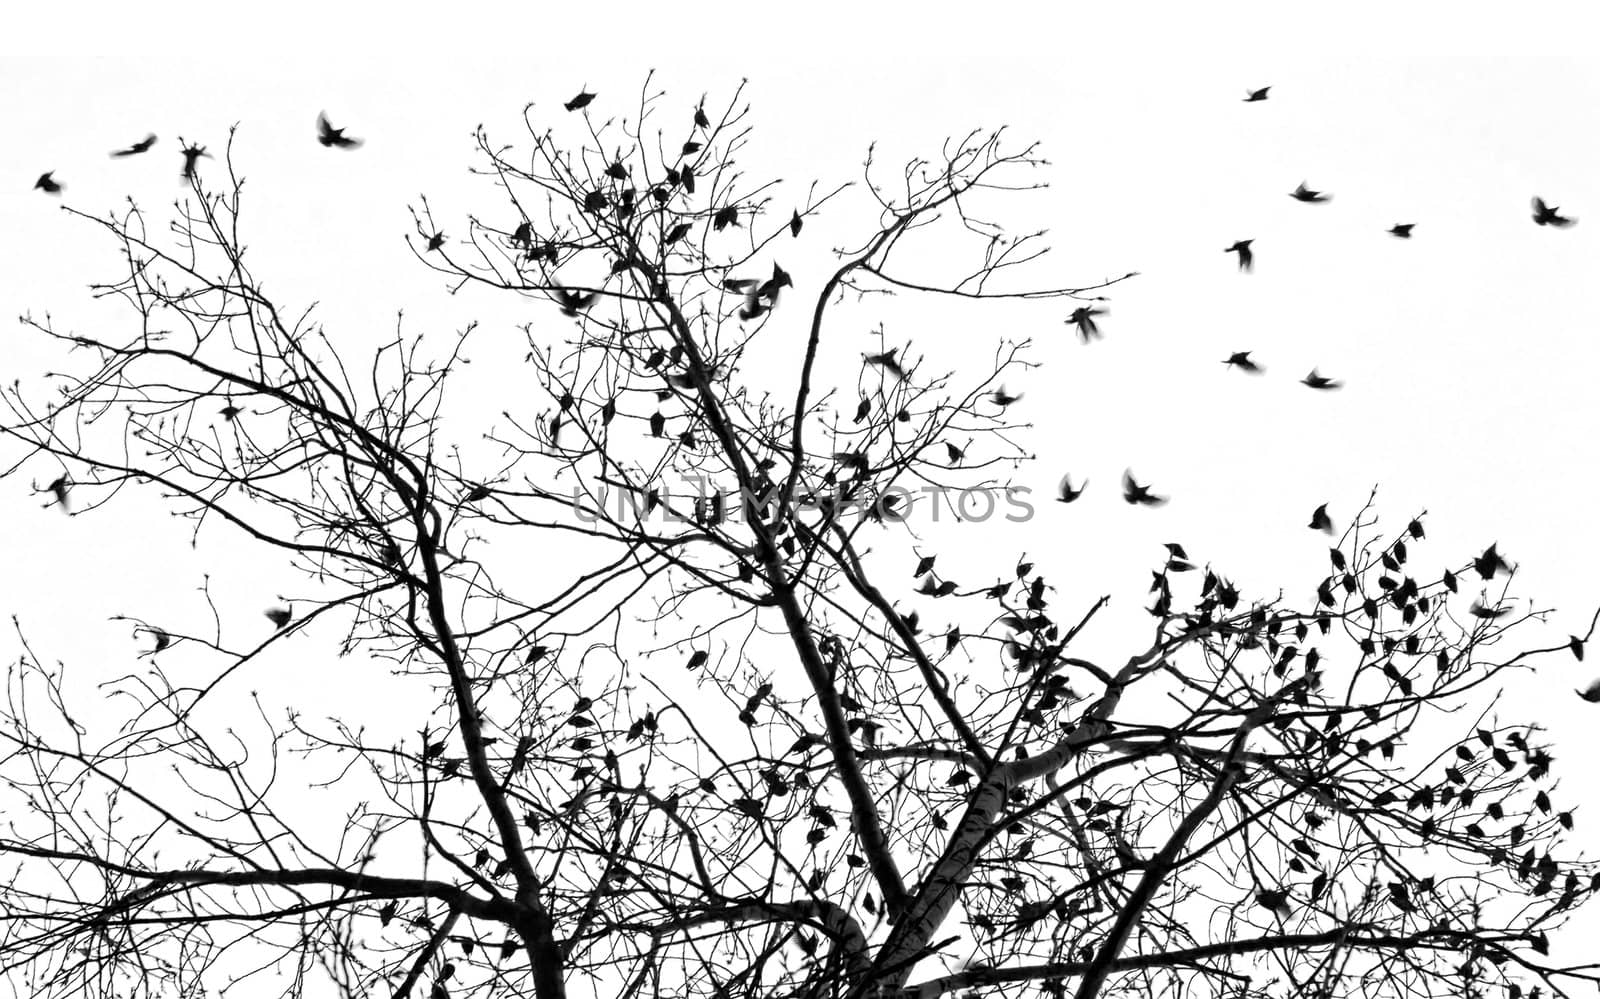 many starlings by weknow